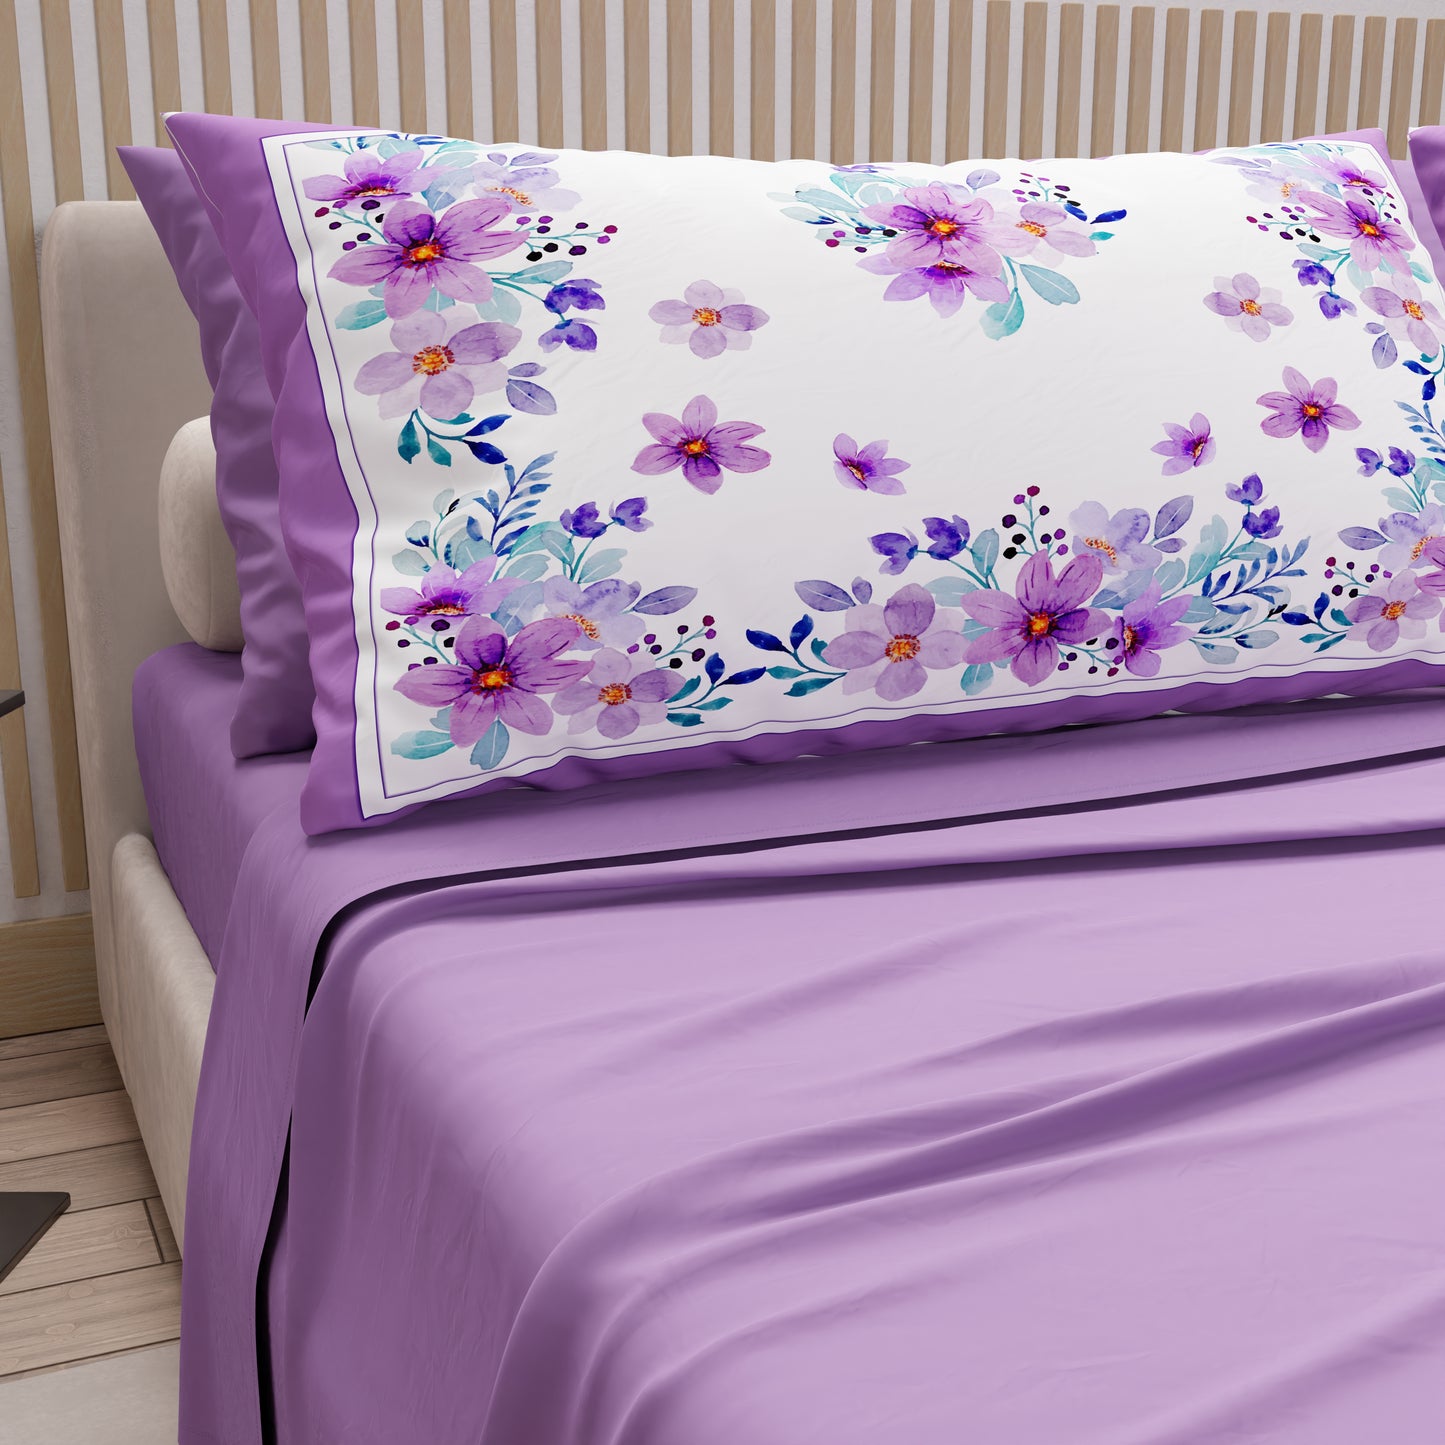 Cotton Sheets, Bed Set with Purple Floral Digital Print Pillowcases